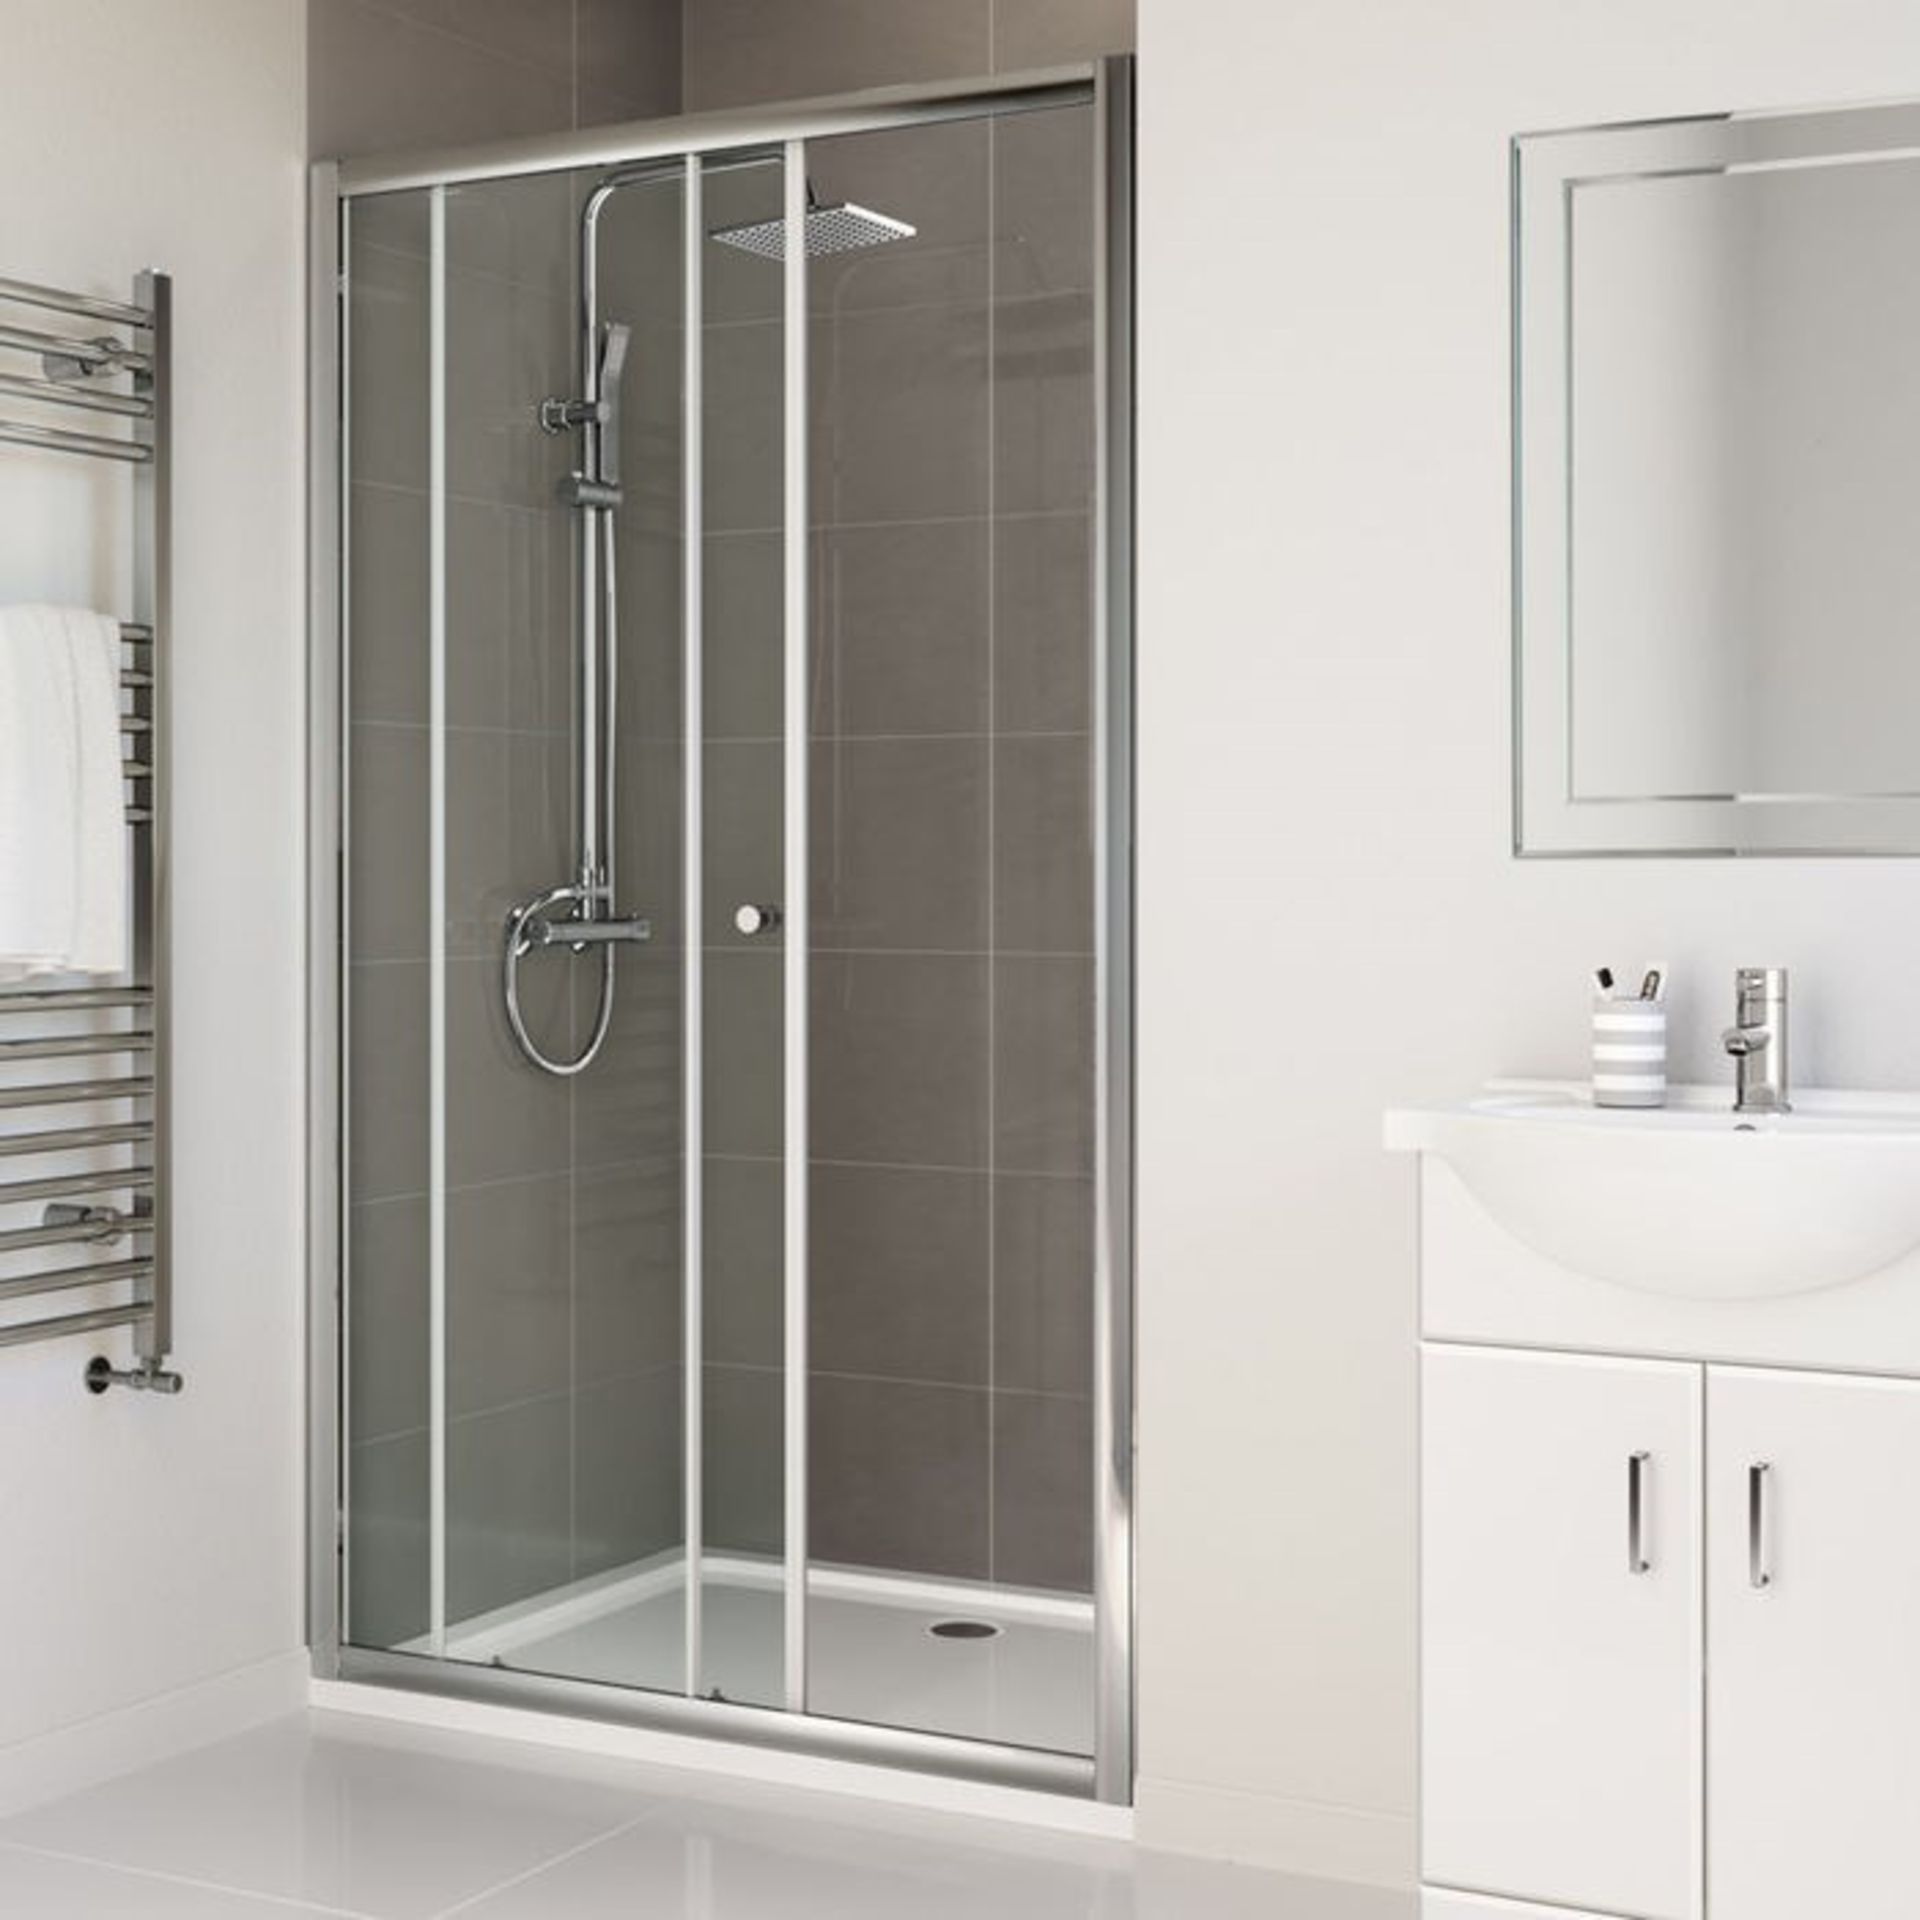 Twyfords 1000mm - Elements Sliding Shower Door. RRP £399.99.8mm Safety Glass Fully waterproof... - Image 3 of 3